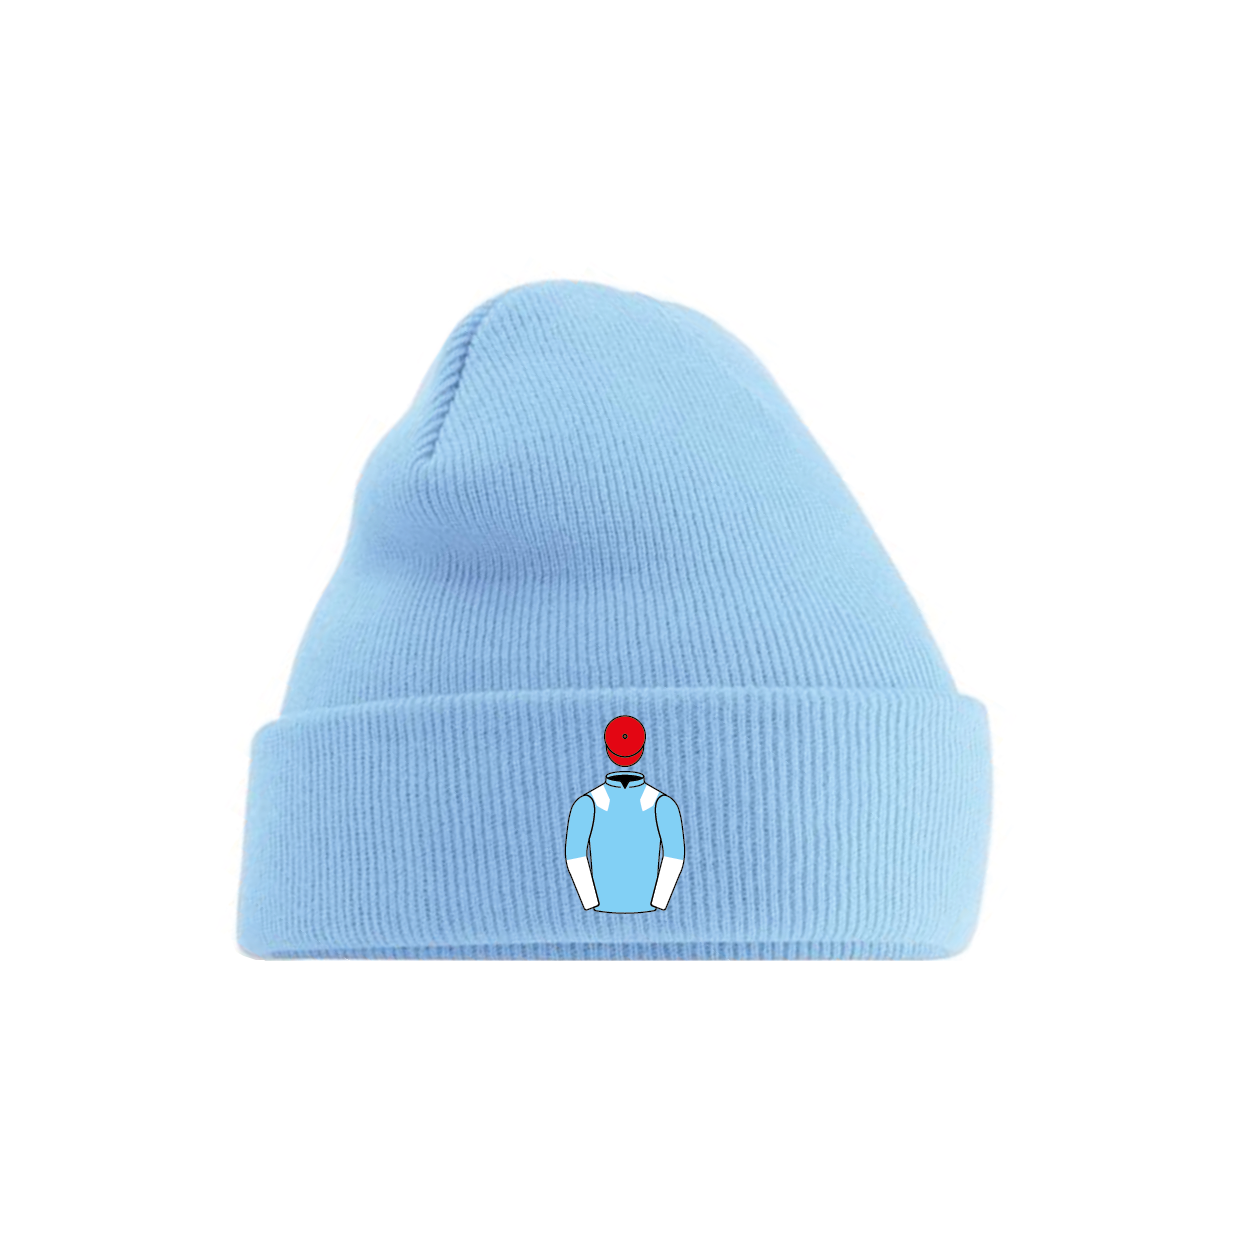 Foxtrot Racing Embroidered Cuffed Beanie - Hacked Up